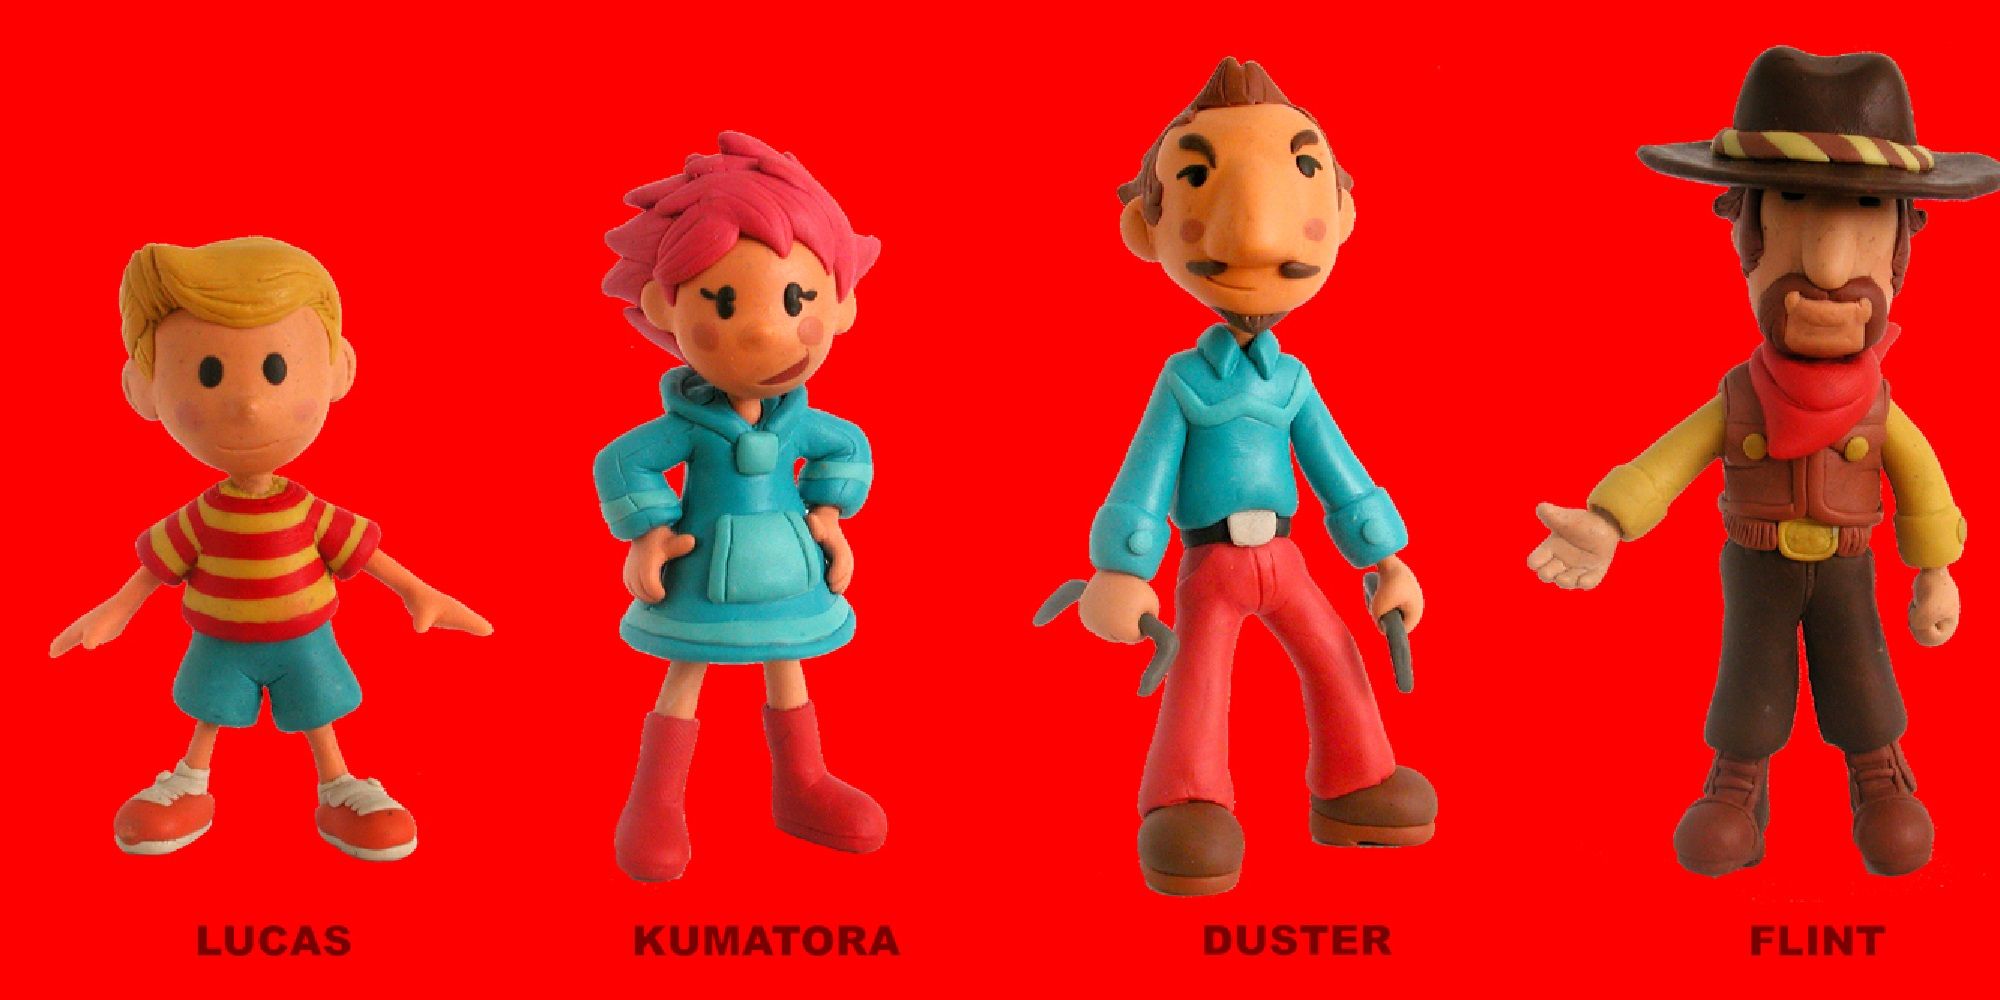 Why Nintendos Clay Figures Disappeared